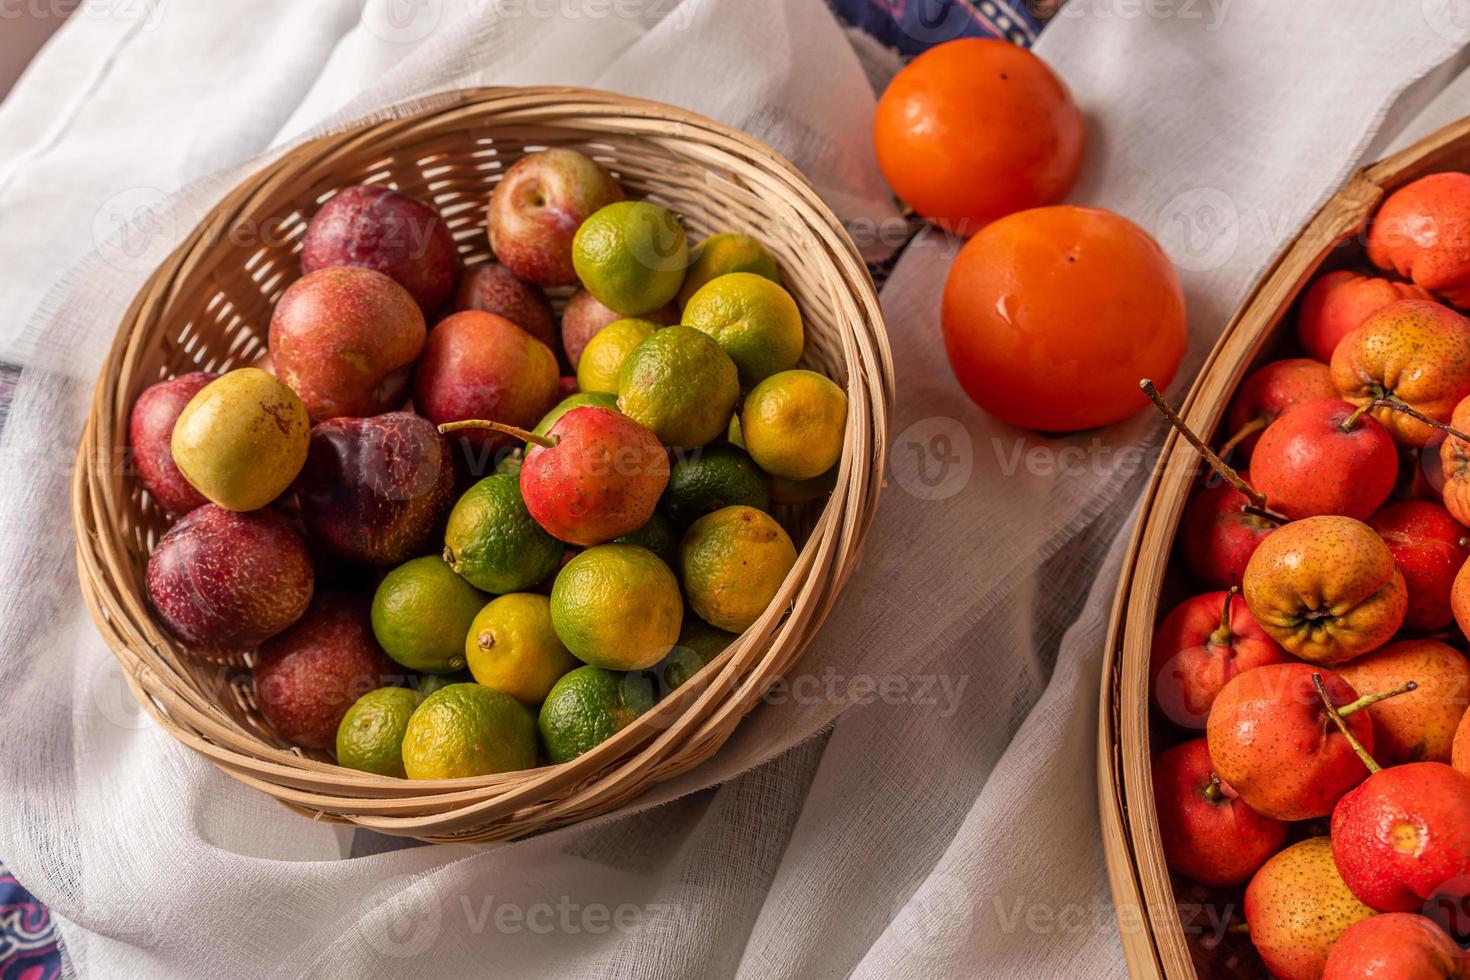 Many colors and varieties of fruit are either on the plate or scattered on the wooden table photo